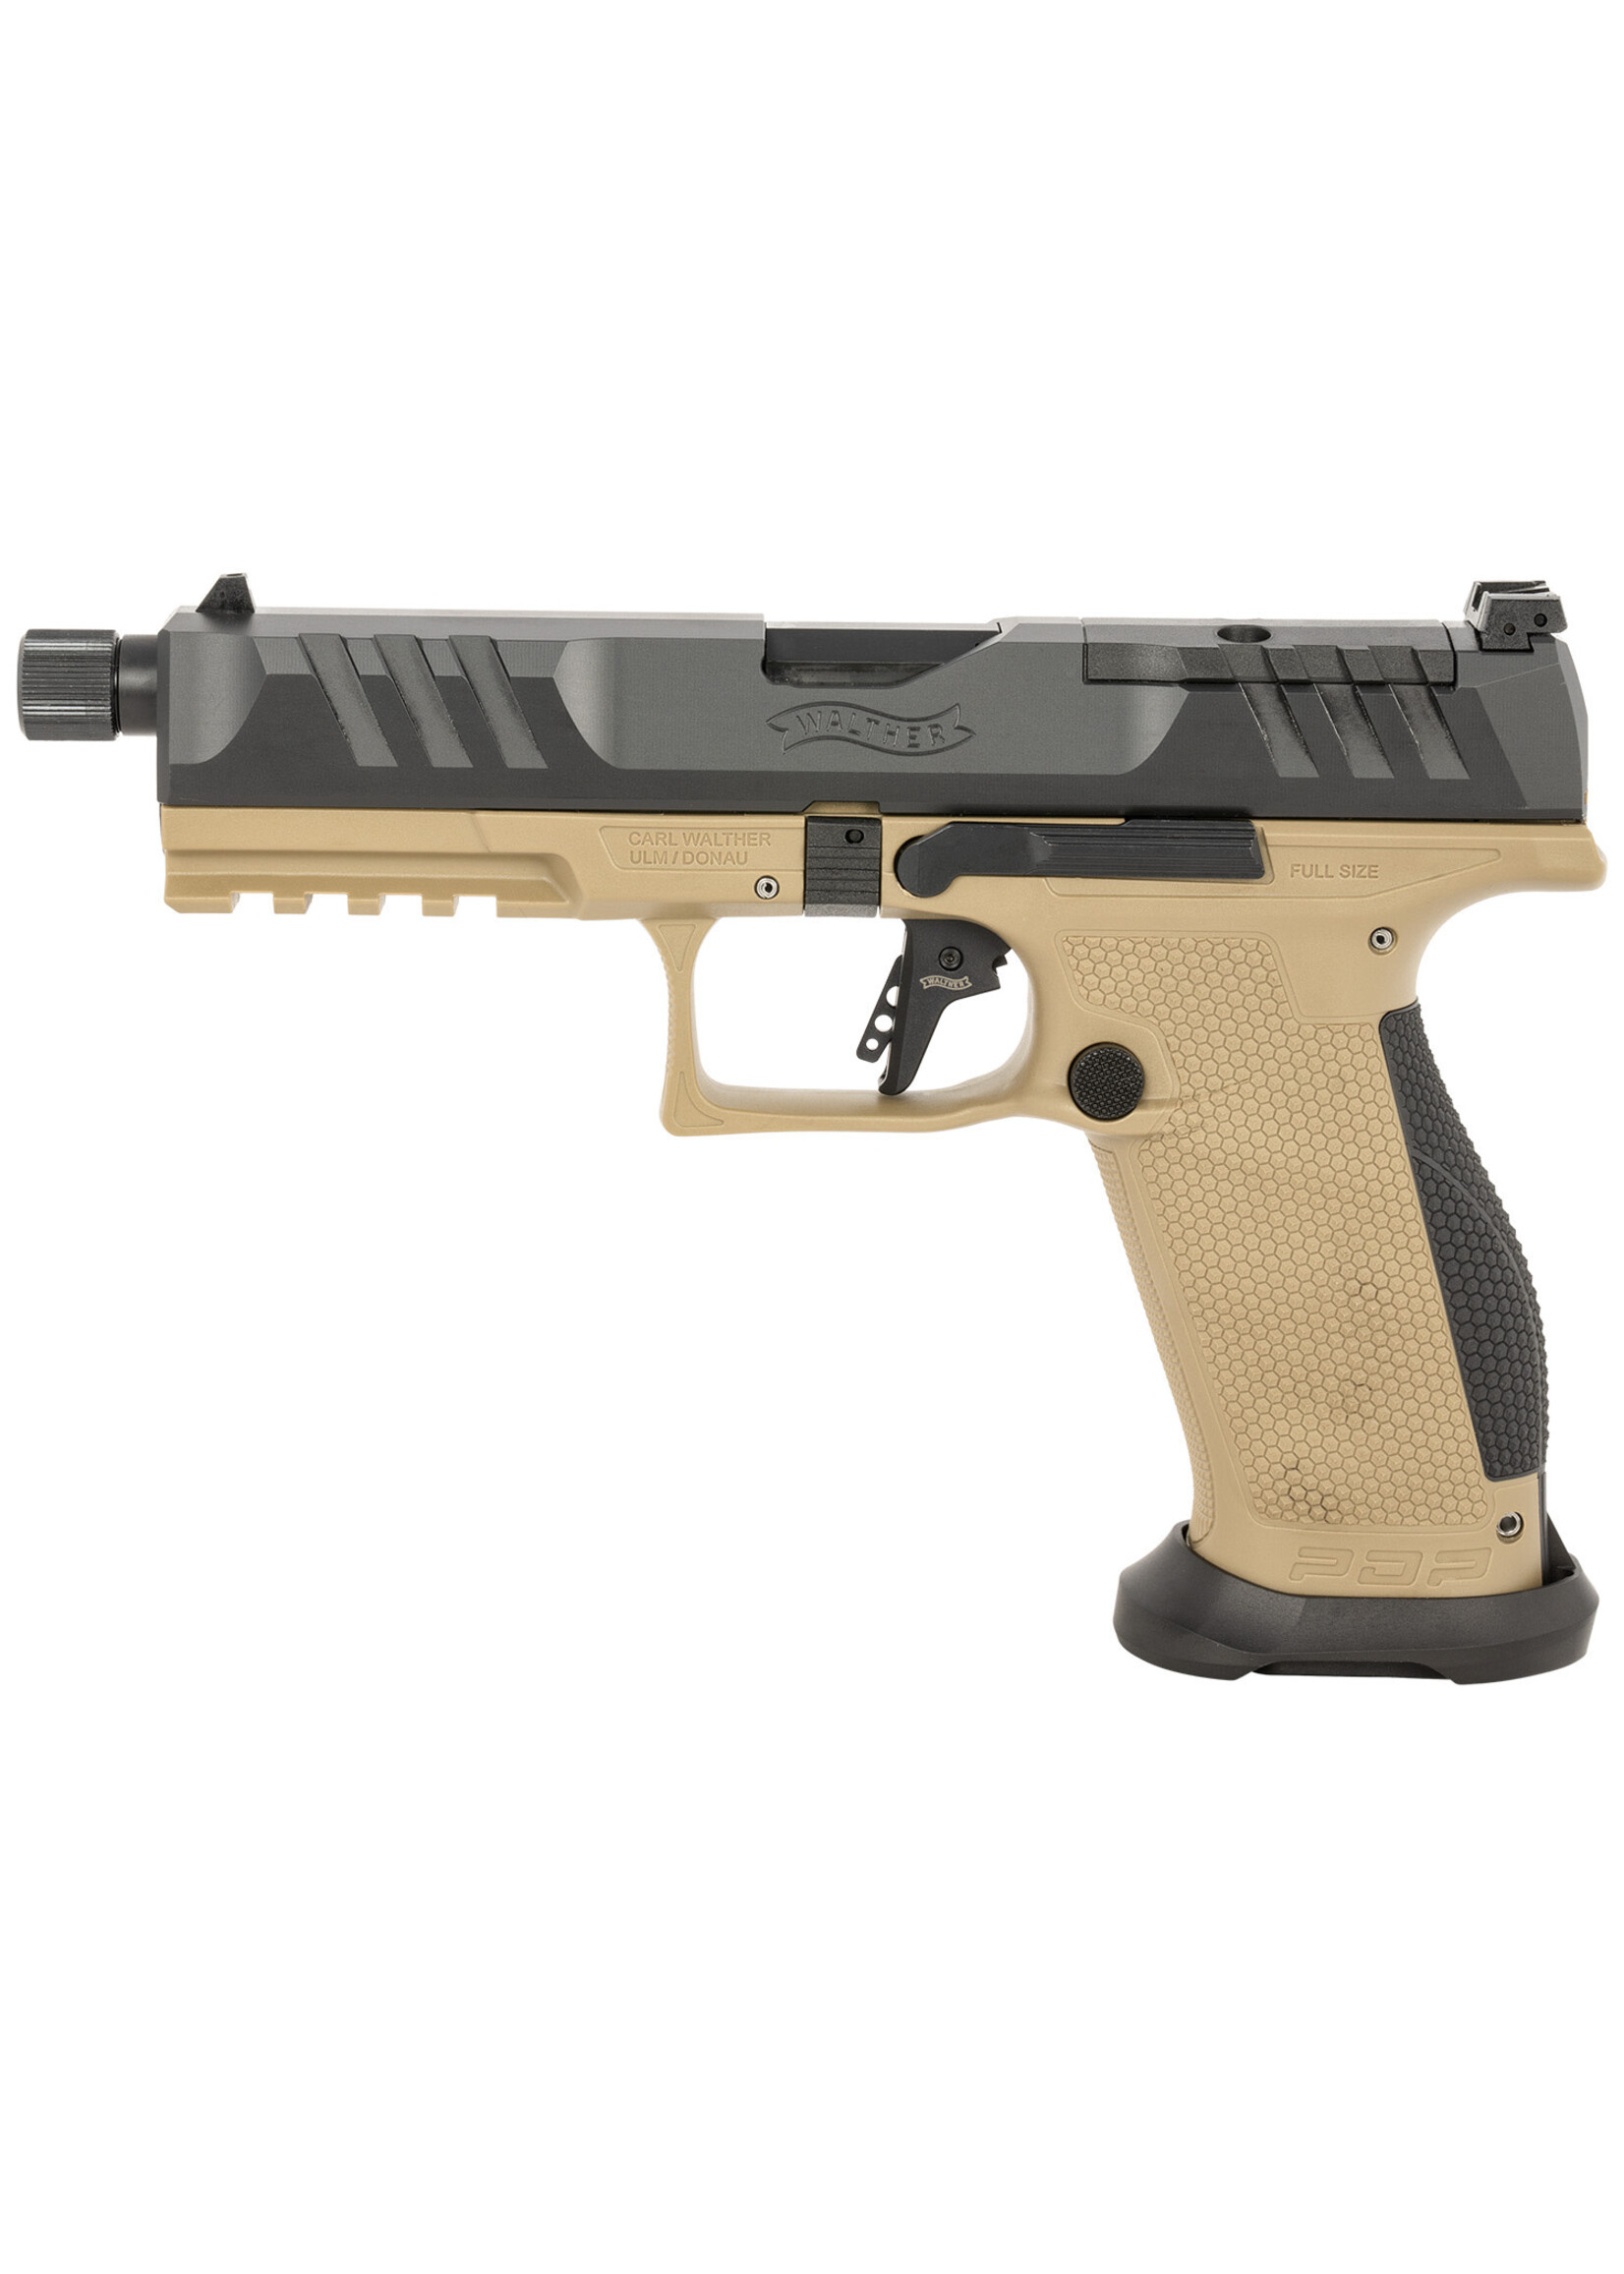 Walther Walther Arms 2876582 PDP Pro SD 9mm Luger 18+1 5.10" Threaded Barrel, Black Optic Cut/Serrated Slide, FDE Polymer Frame with Pic. Rail, Performance Duty Grip, Flared Magwell